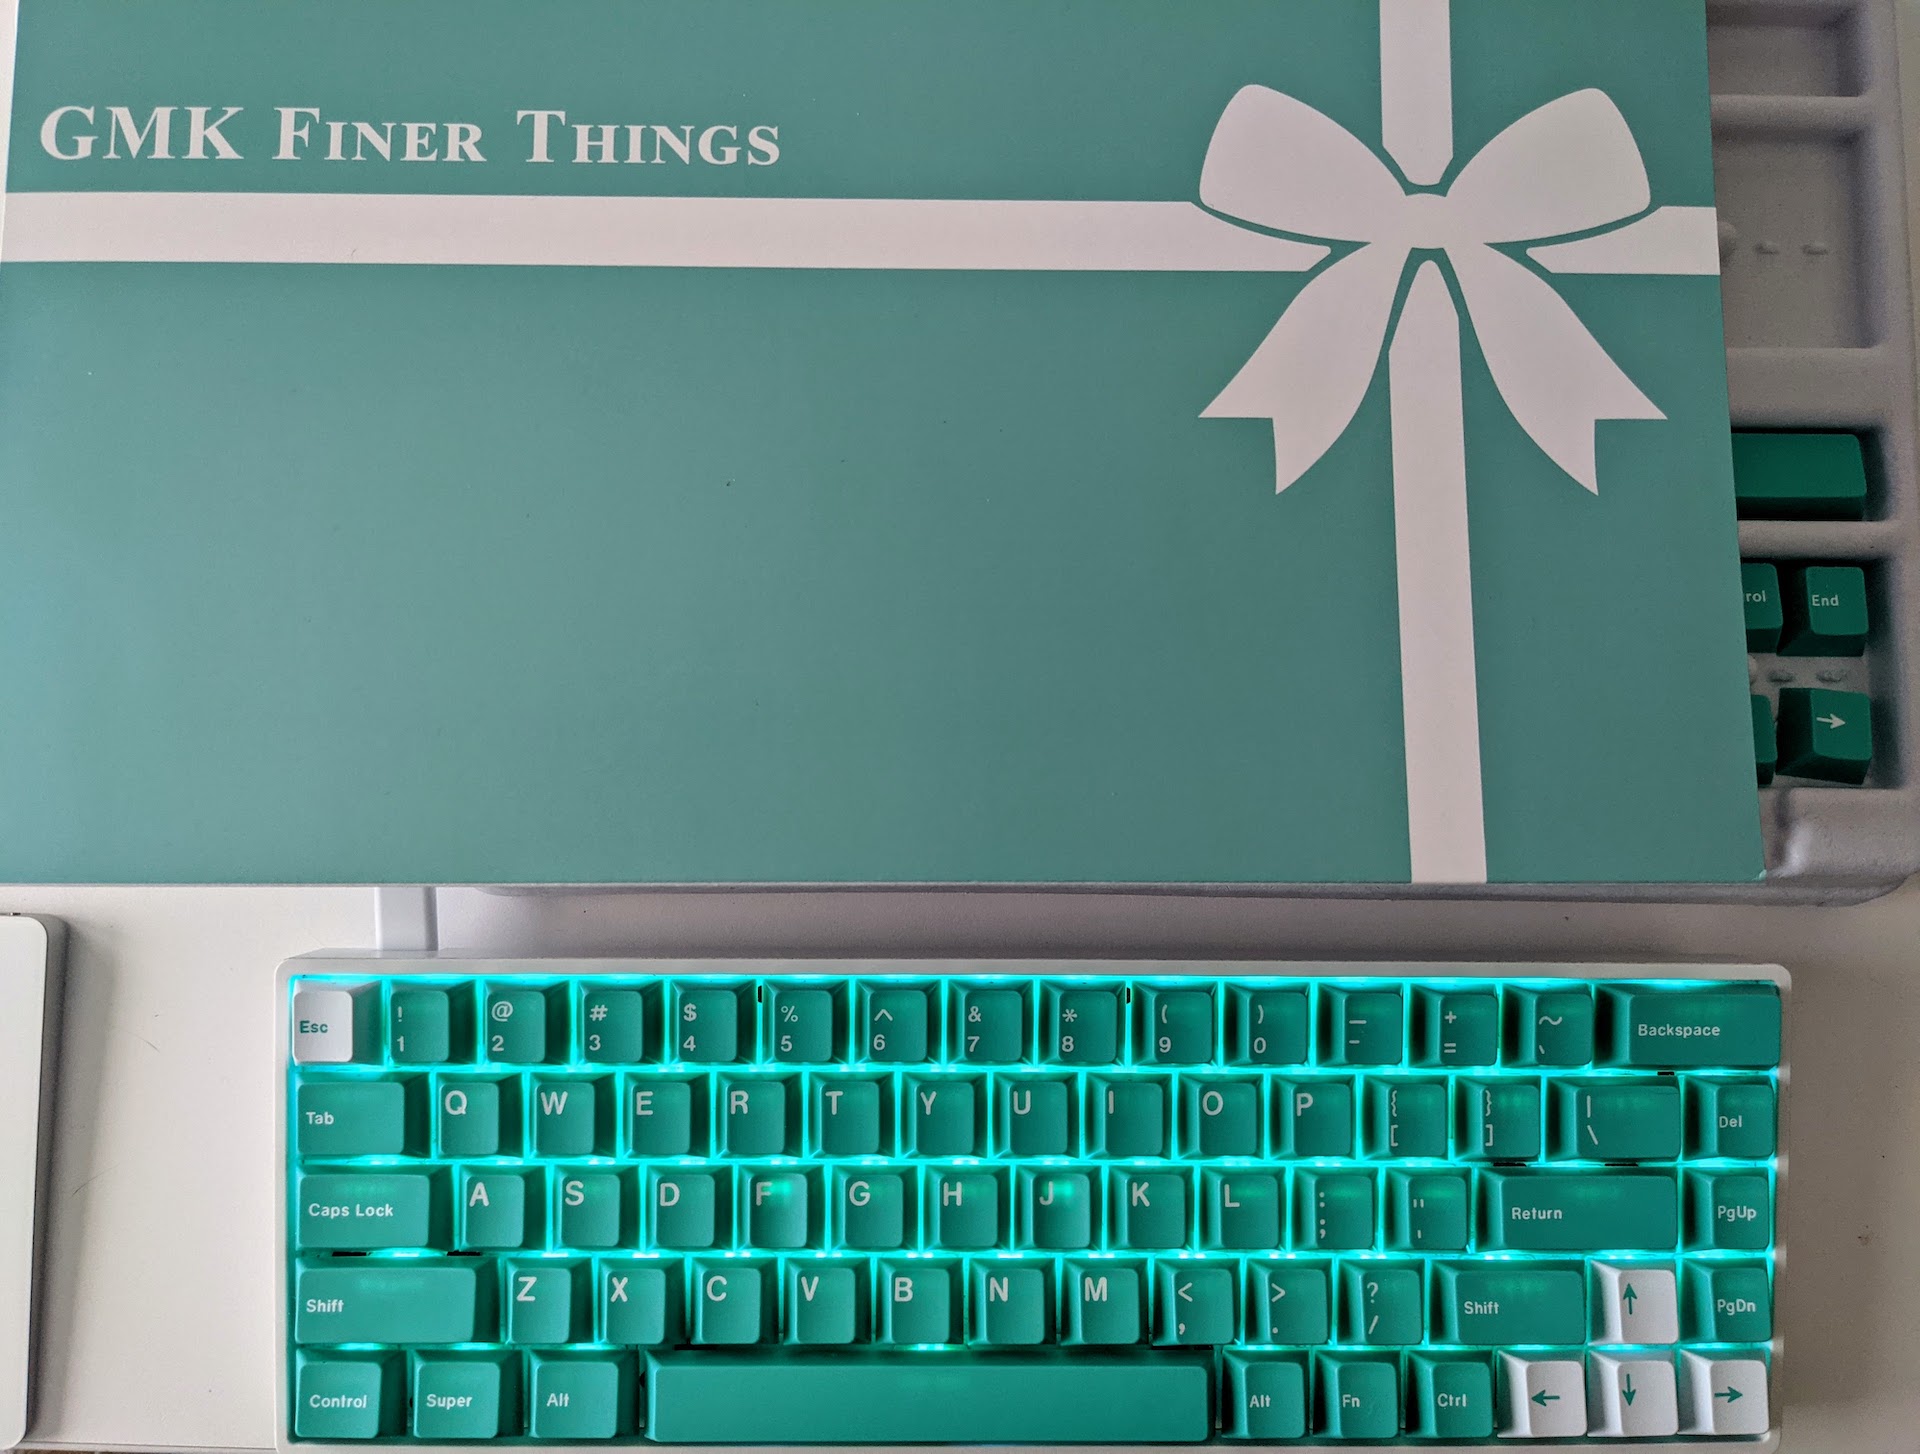 GB] GMK Finer Things - February 1 to March 1 - All kits will be made!